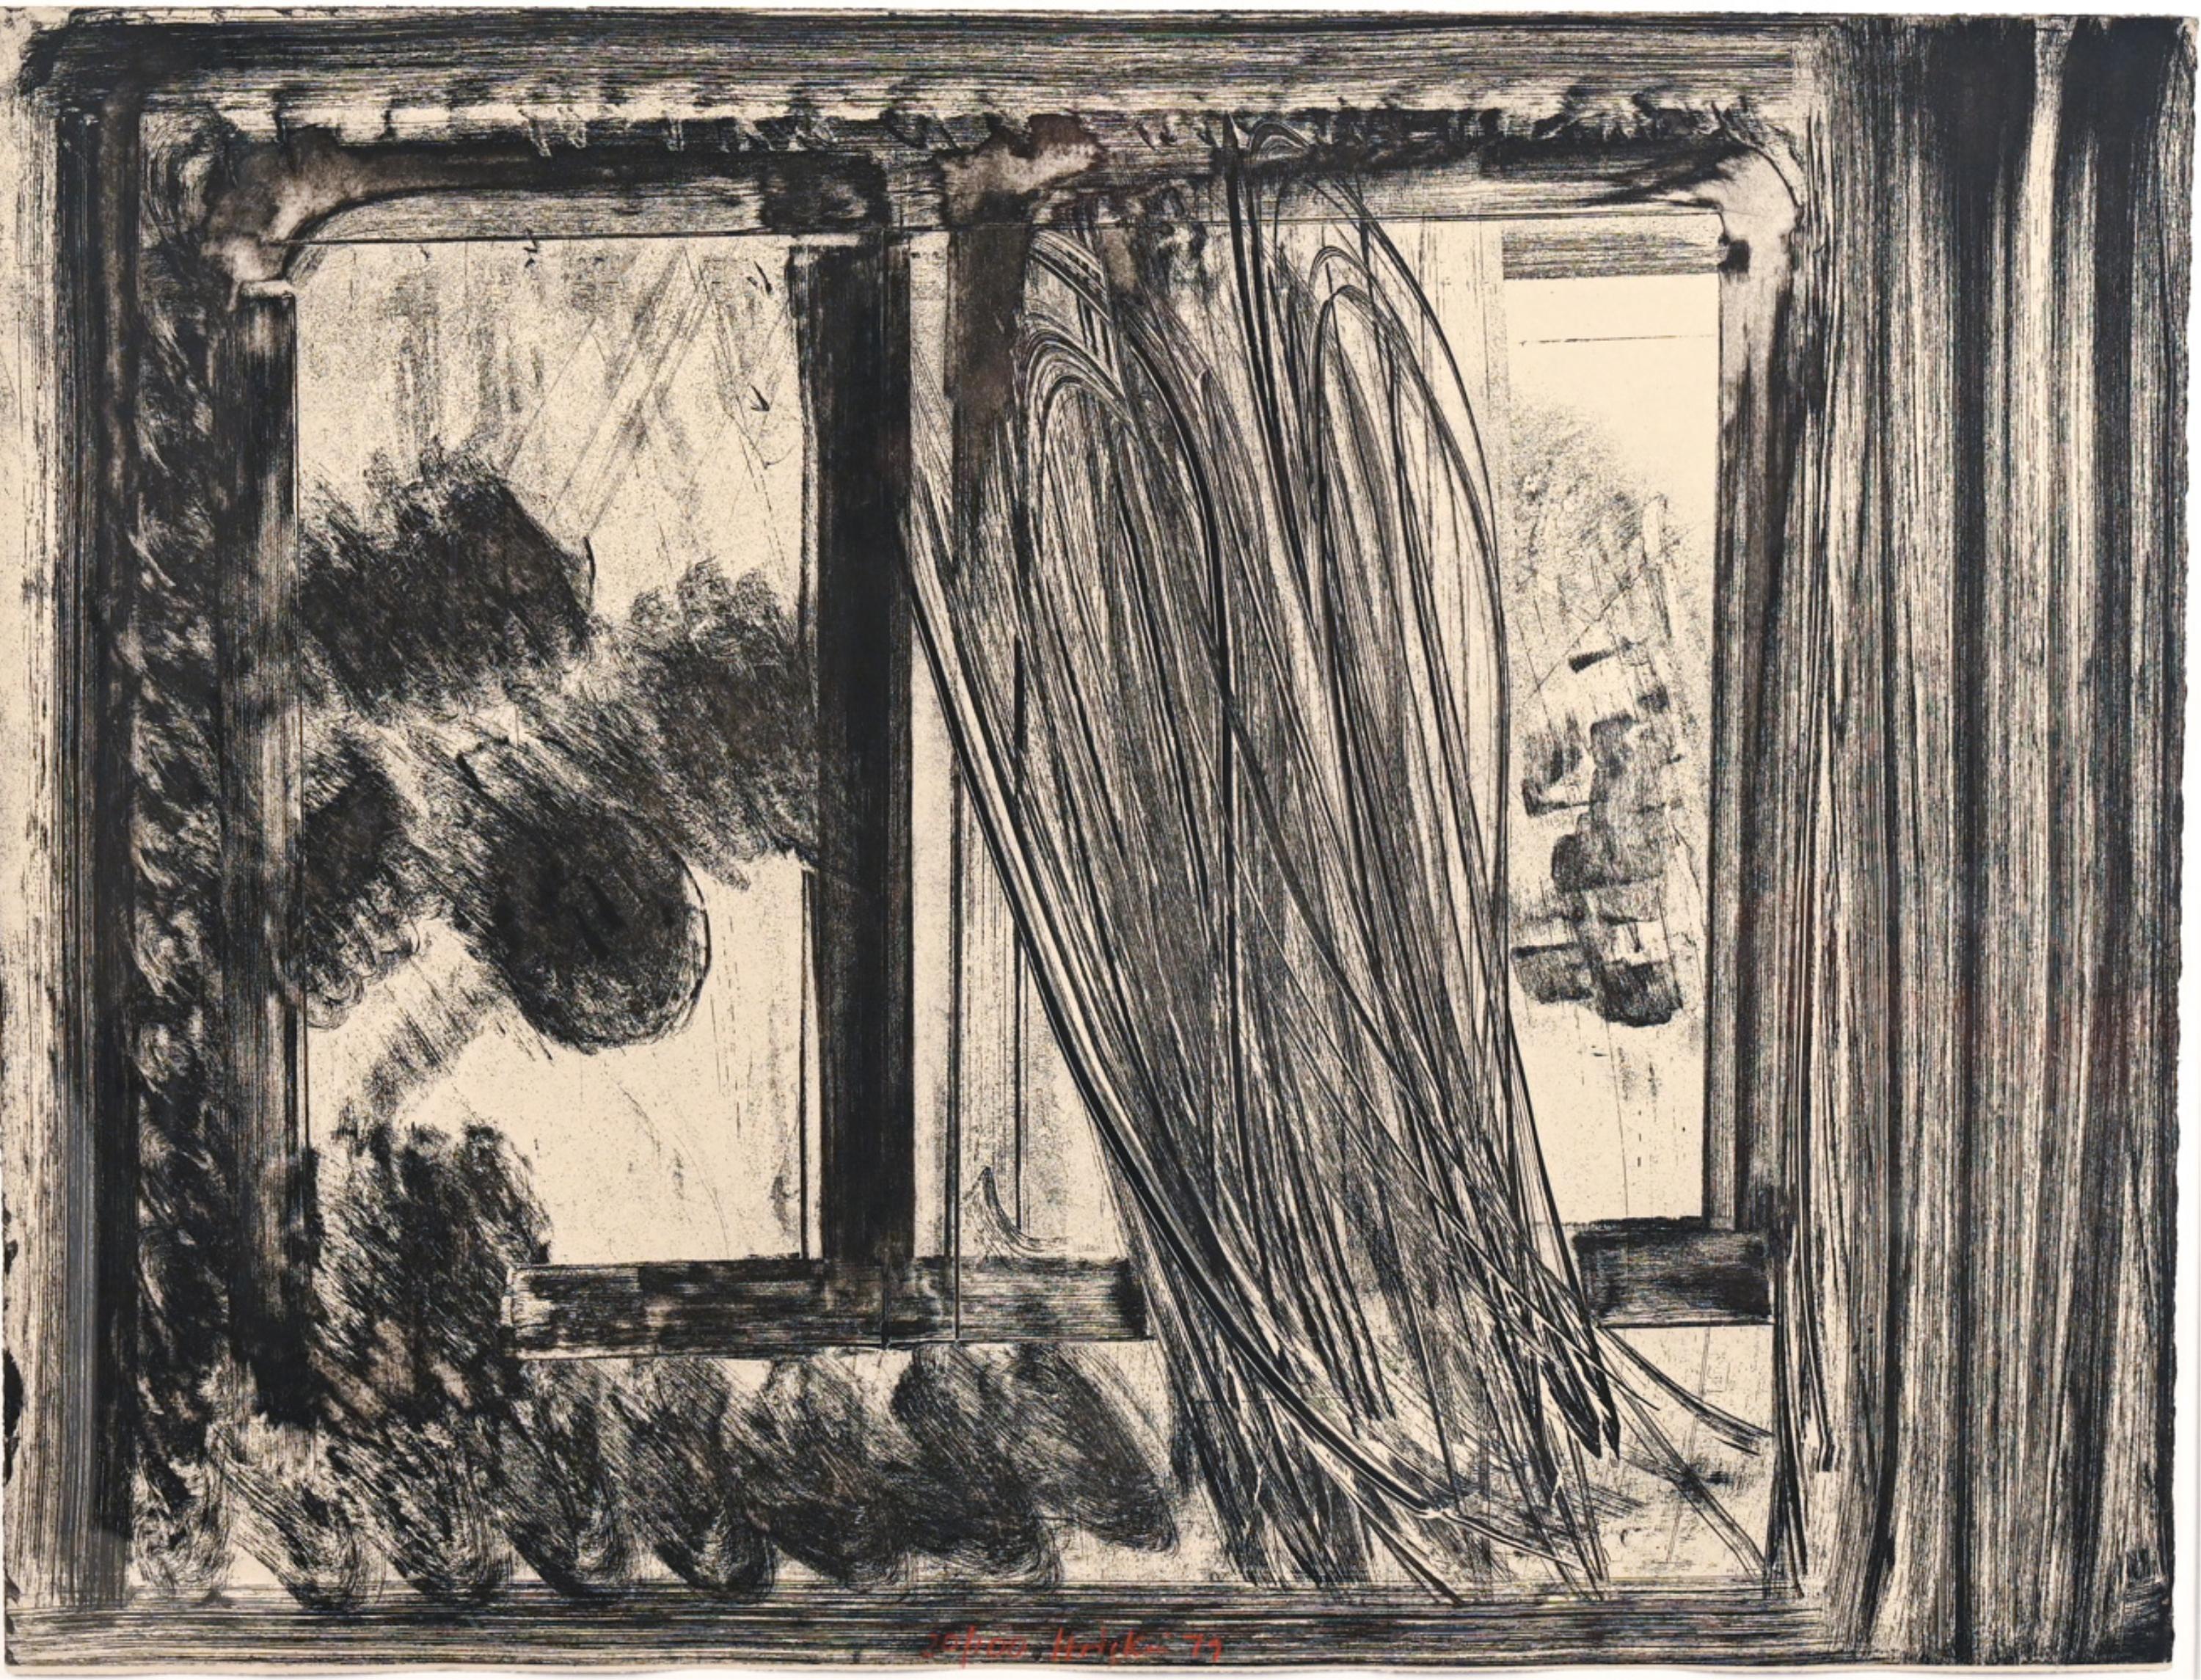 Late Afternoon in the Museum of Art, Abstract Etching by Howard Hodgkin